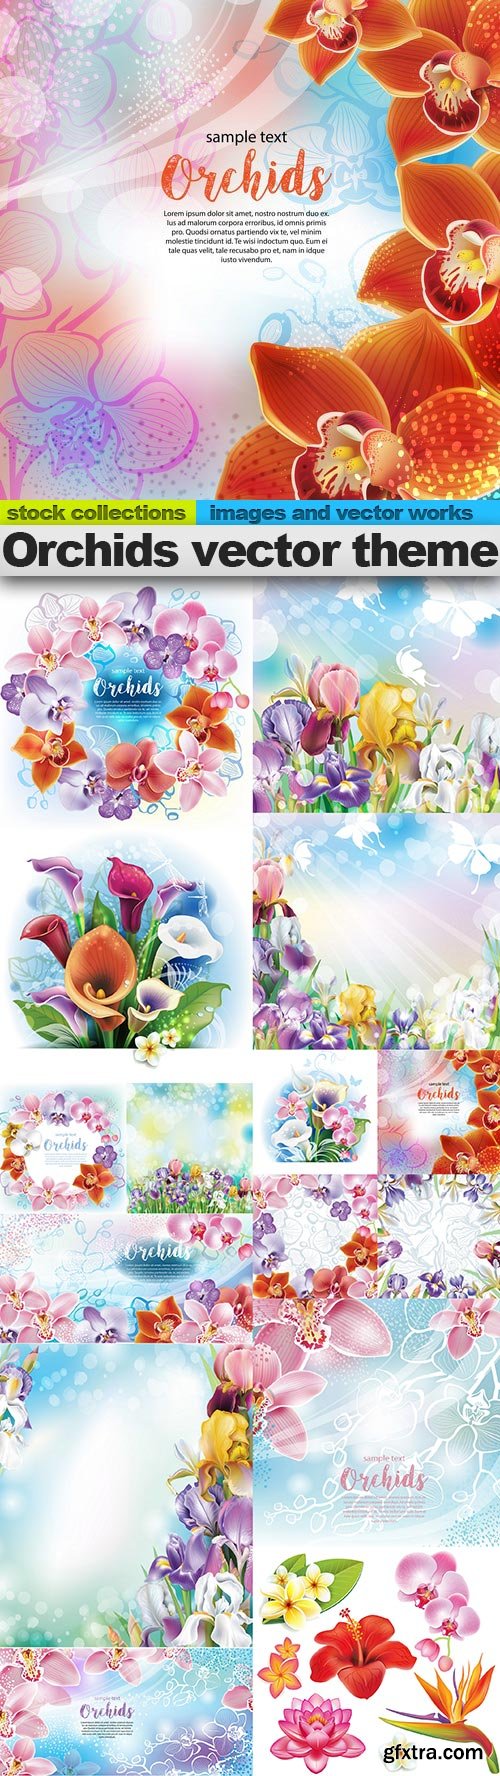 Orchids vector theme, 15 x EPS